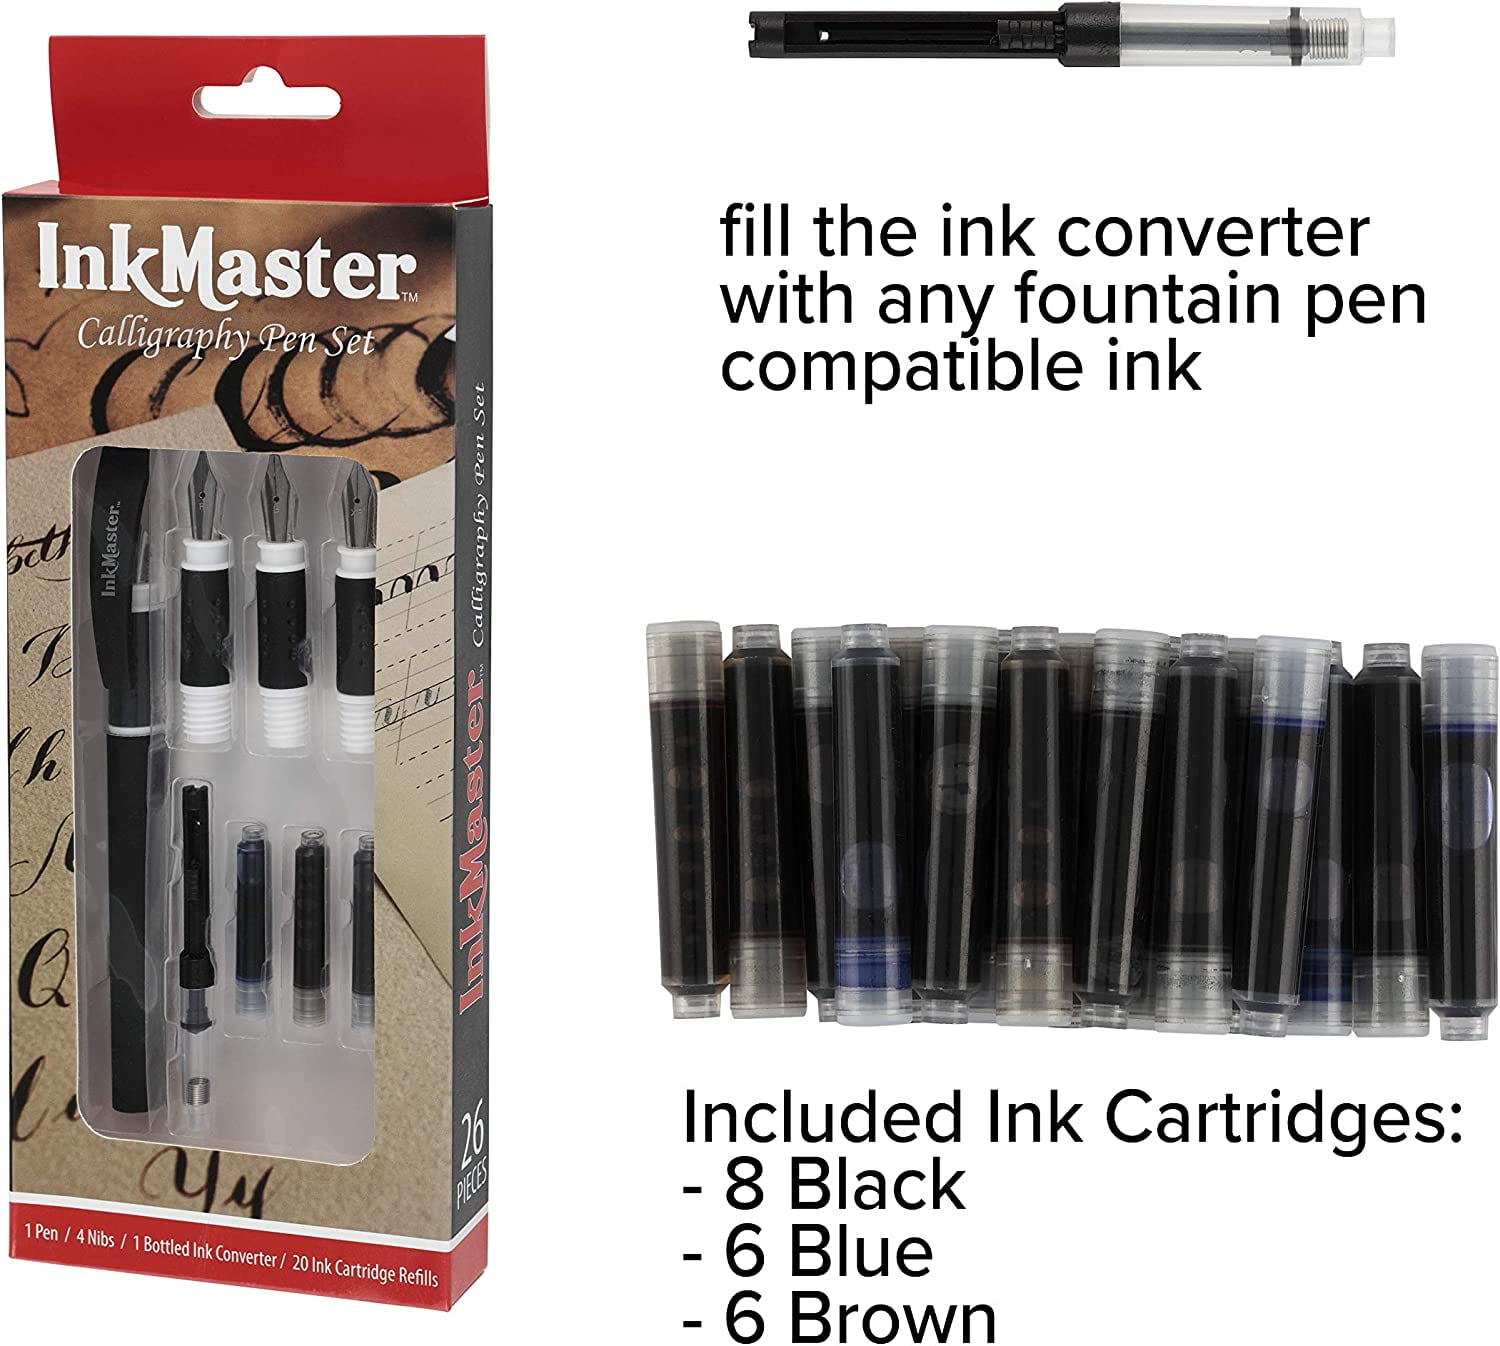  Yokra Fountain Pen Set with Ink and Converter (No Instructions  Included)- Caligraphy Pens for Writing, Medium Nib, 6 Ink Cartridges (3  Black ink,3 Blue ink), Best Pens for Smooth Writing